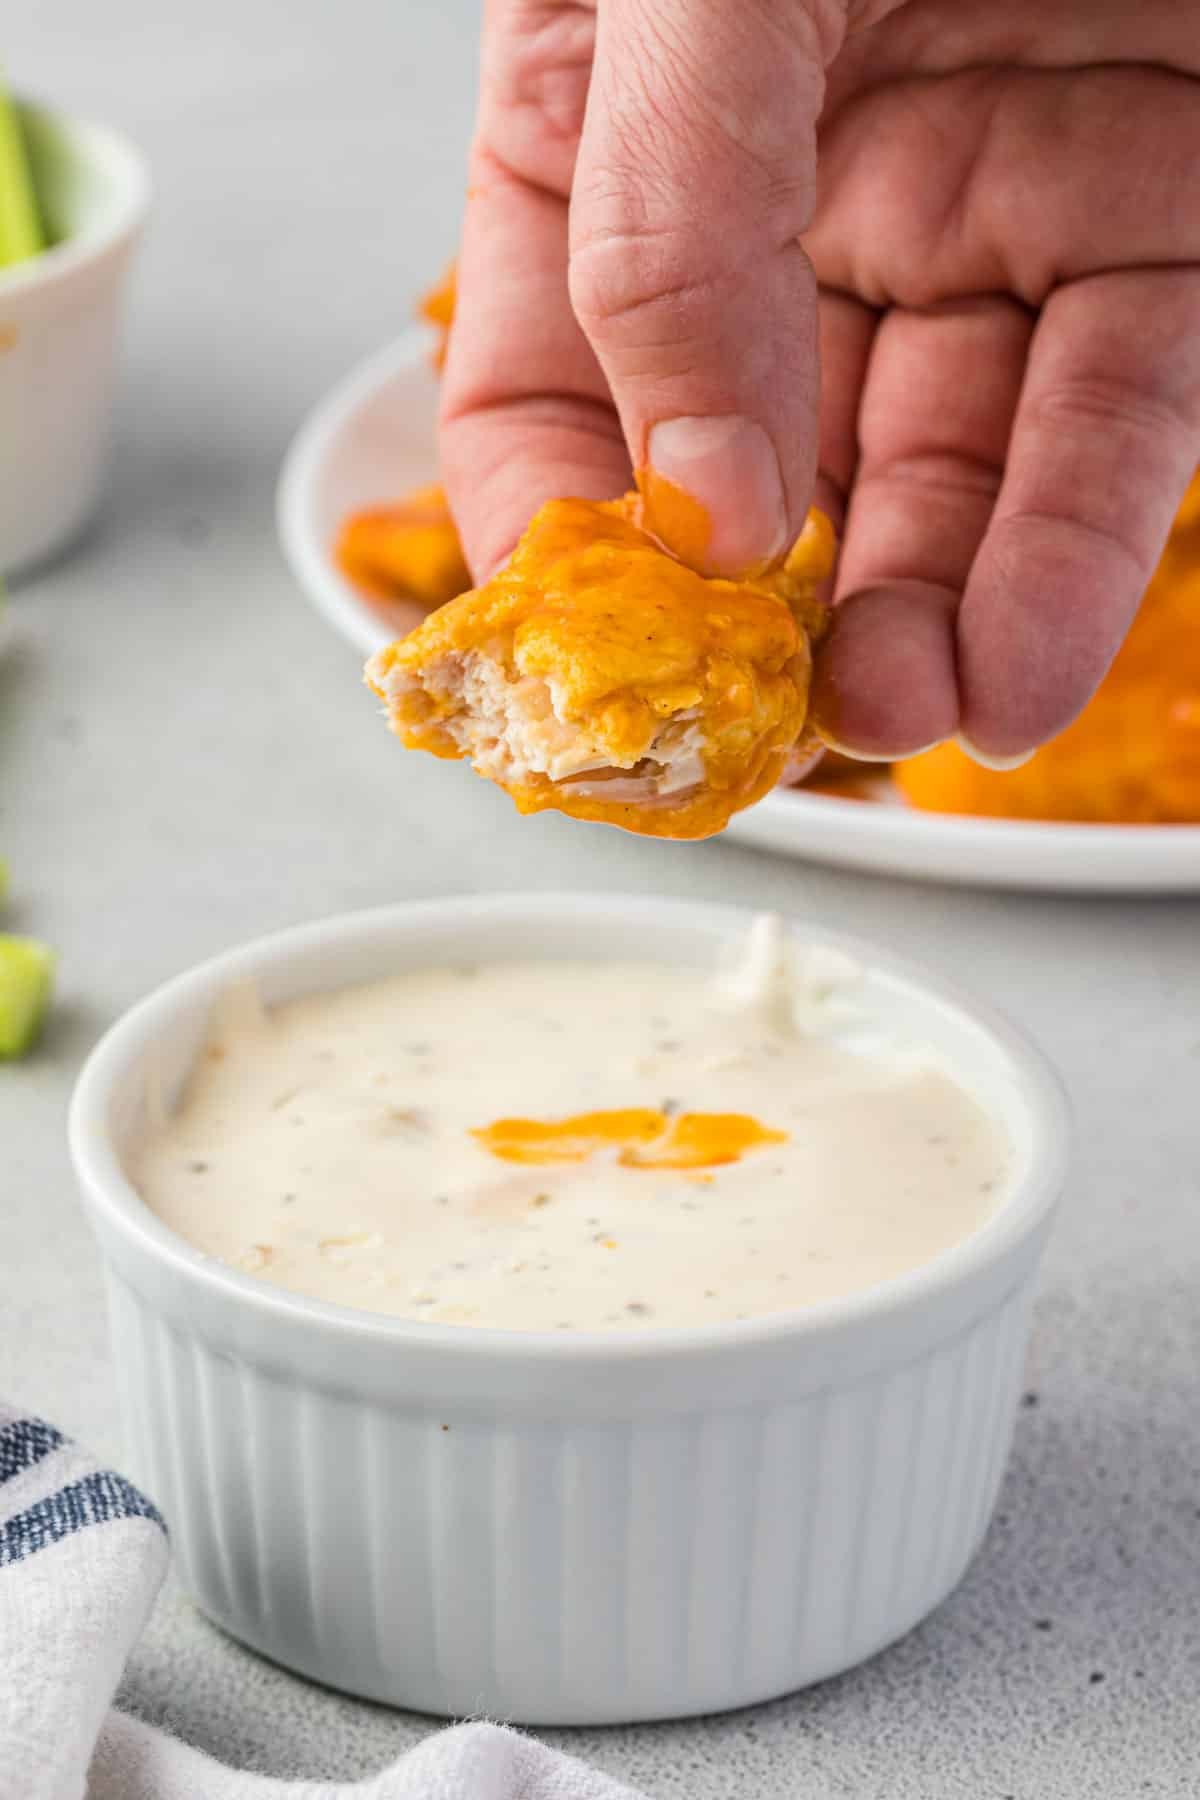 A hand holding a boneless wing with a bite out of it, over a bowl of ranch.